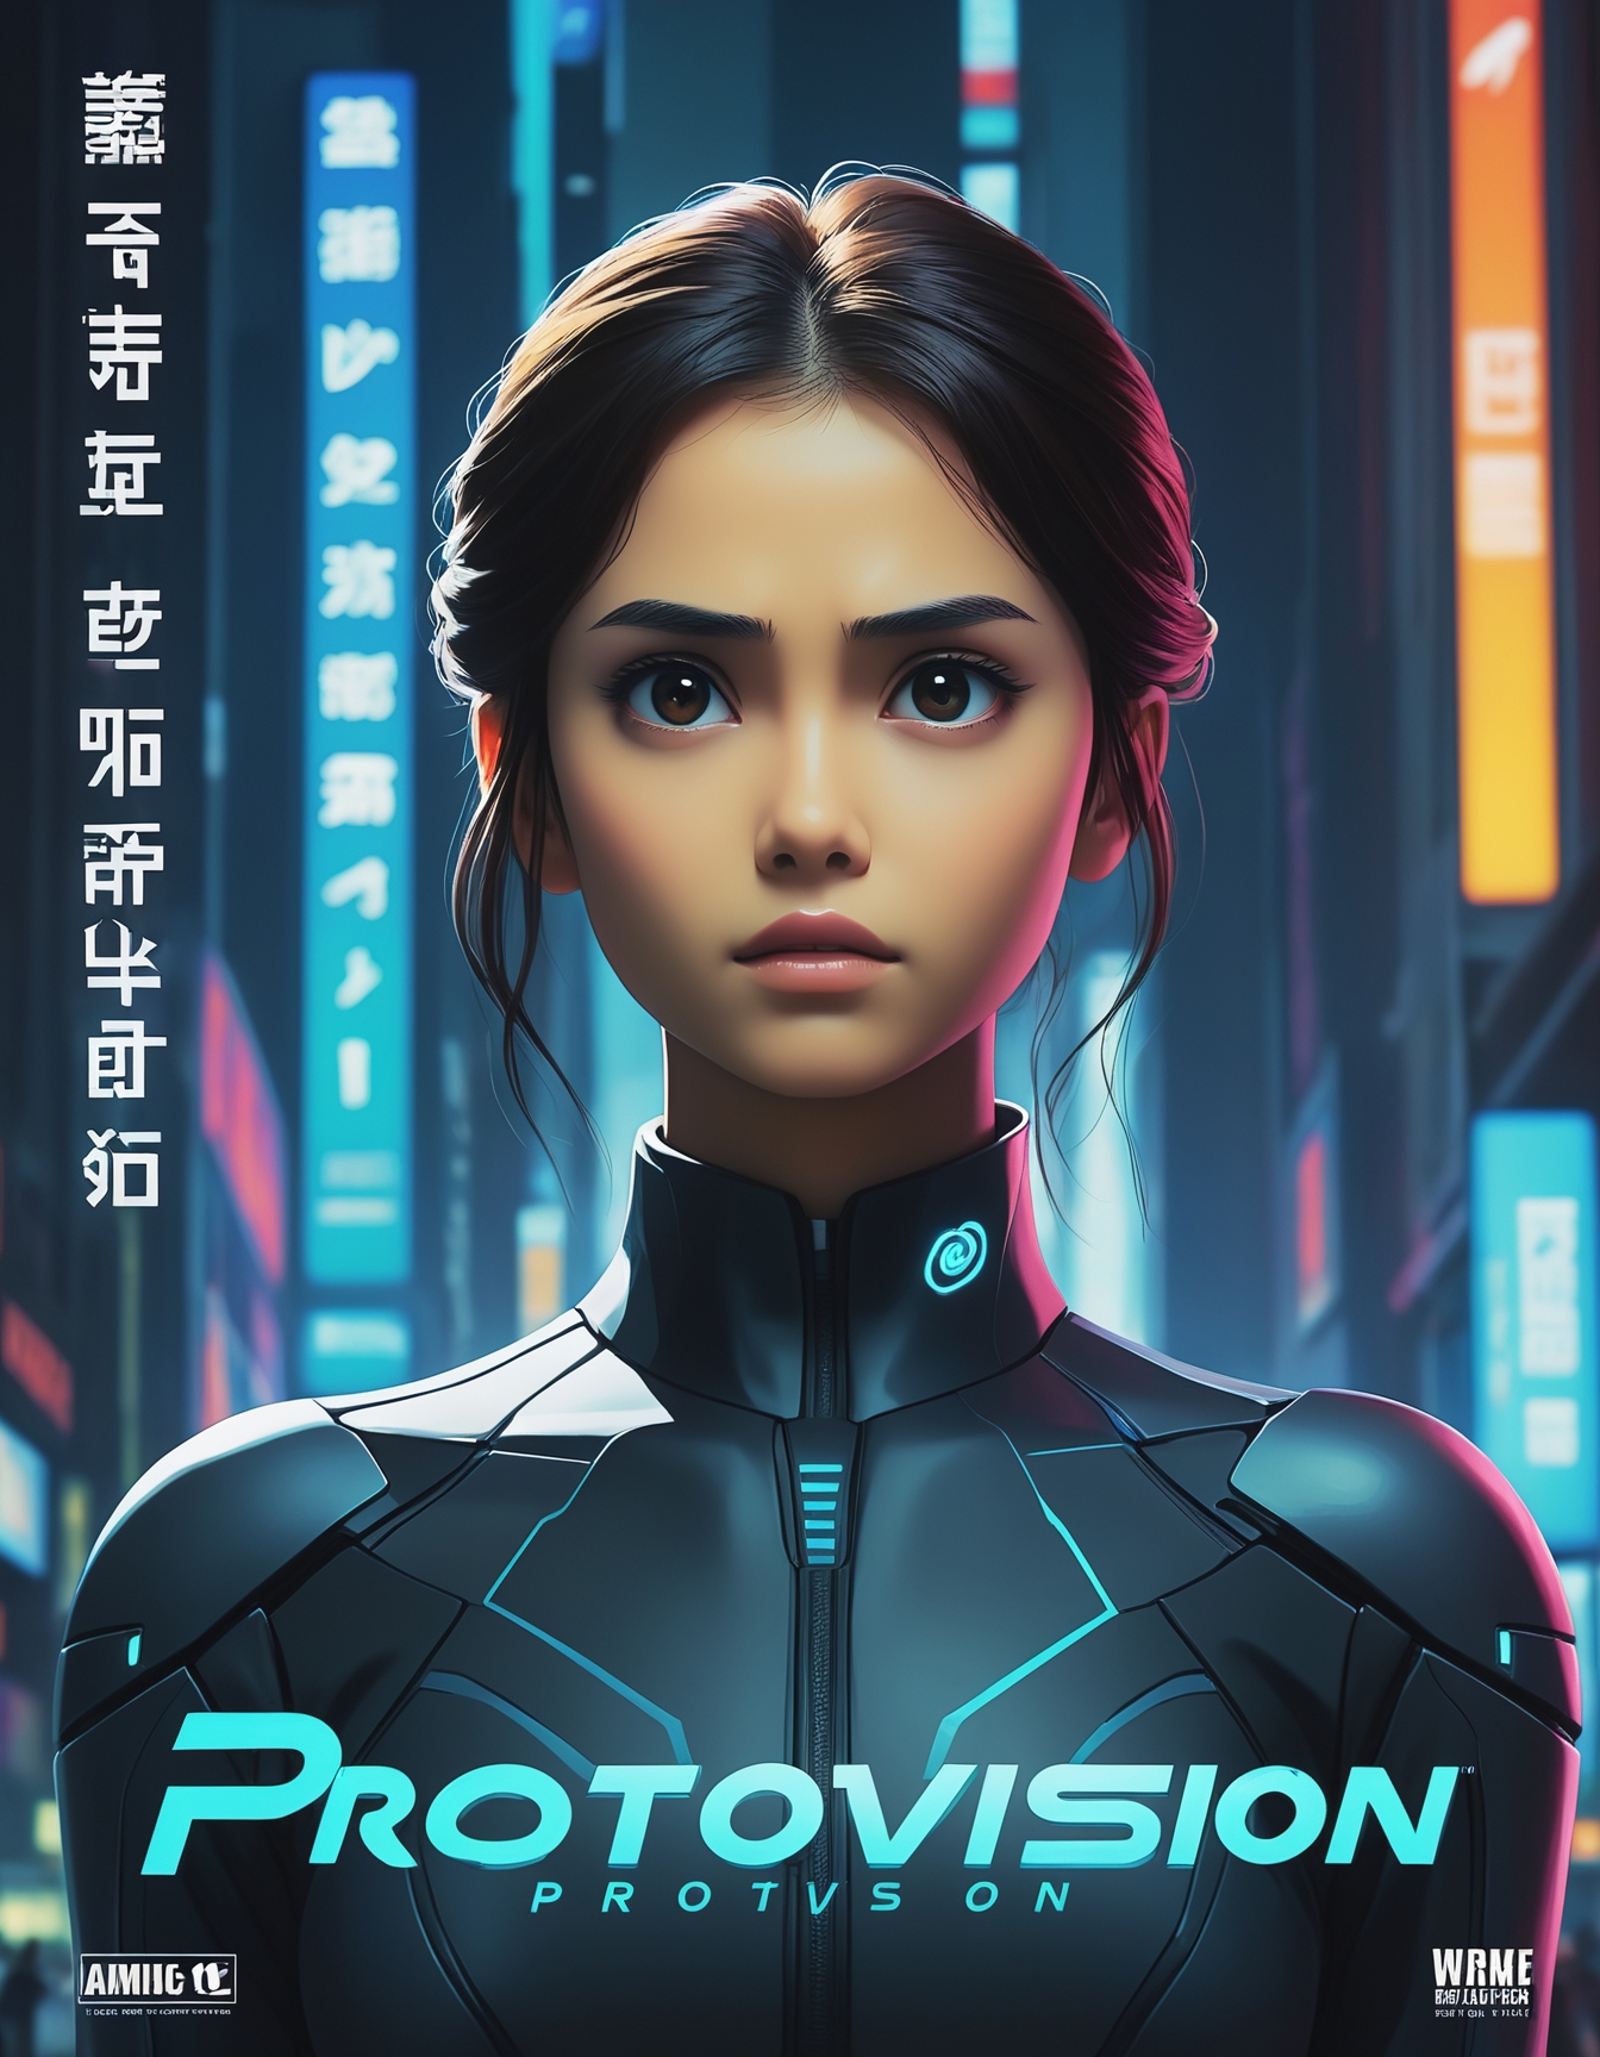 A girl in a futuristic outfit with the word Protovision on the bottom.